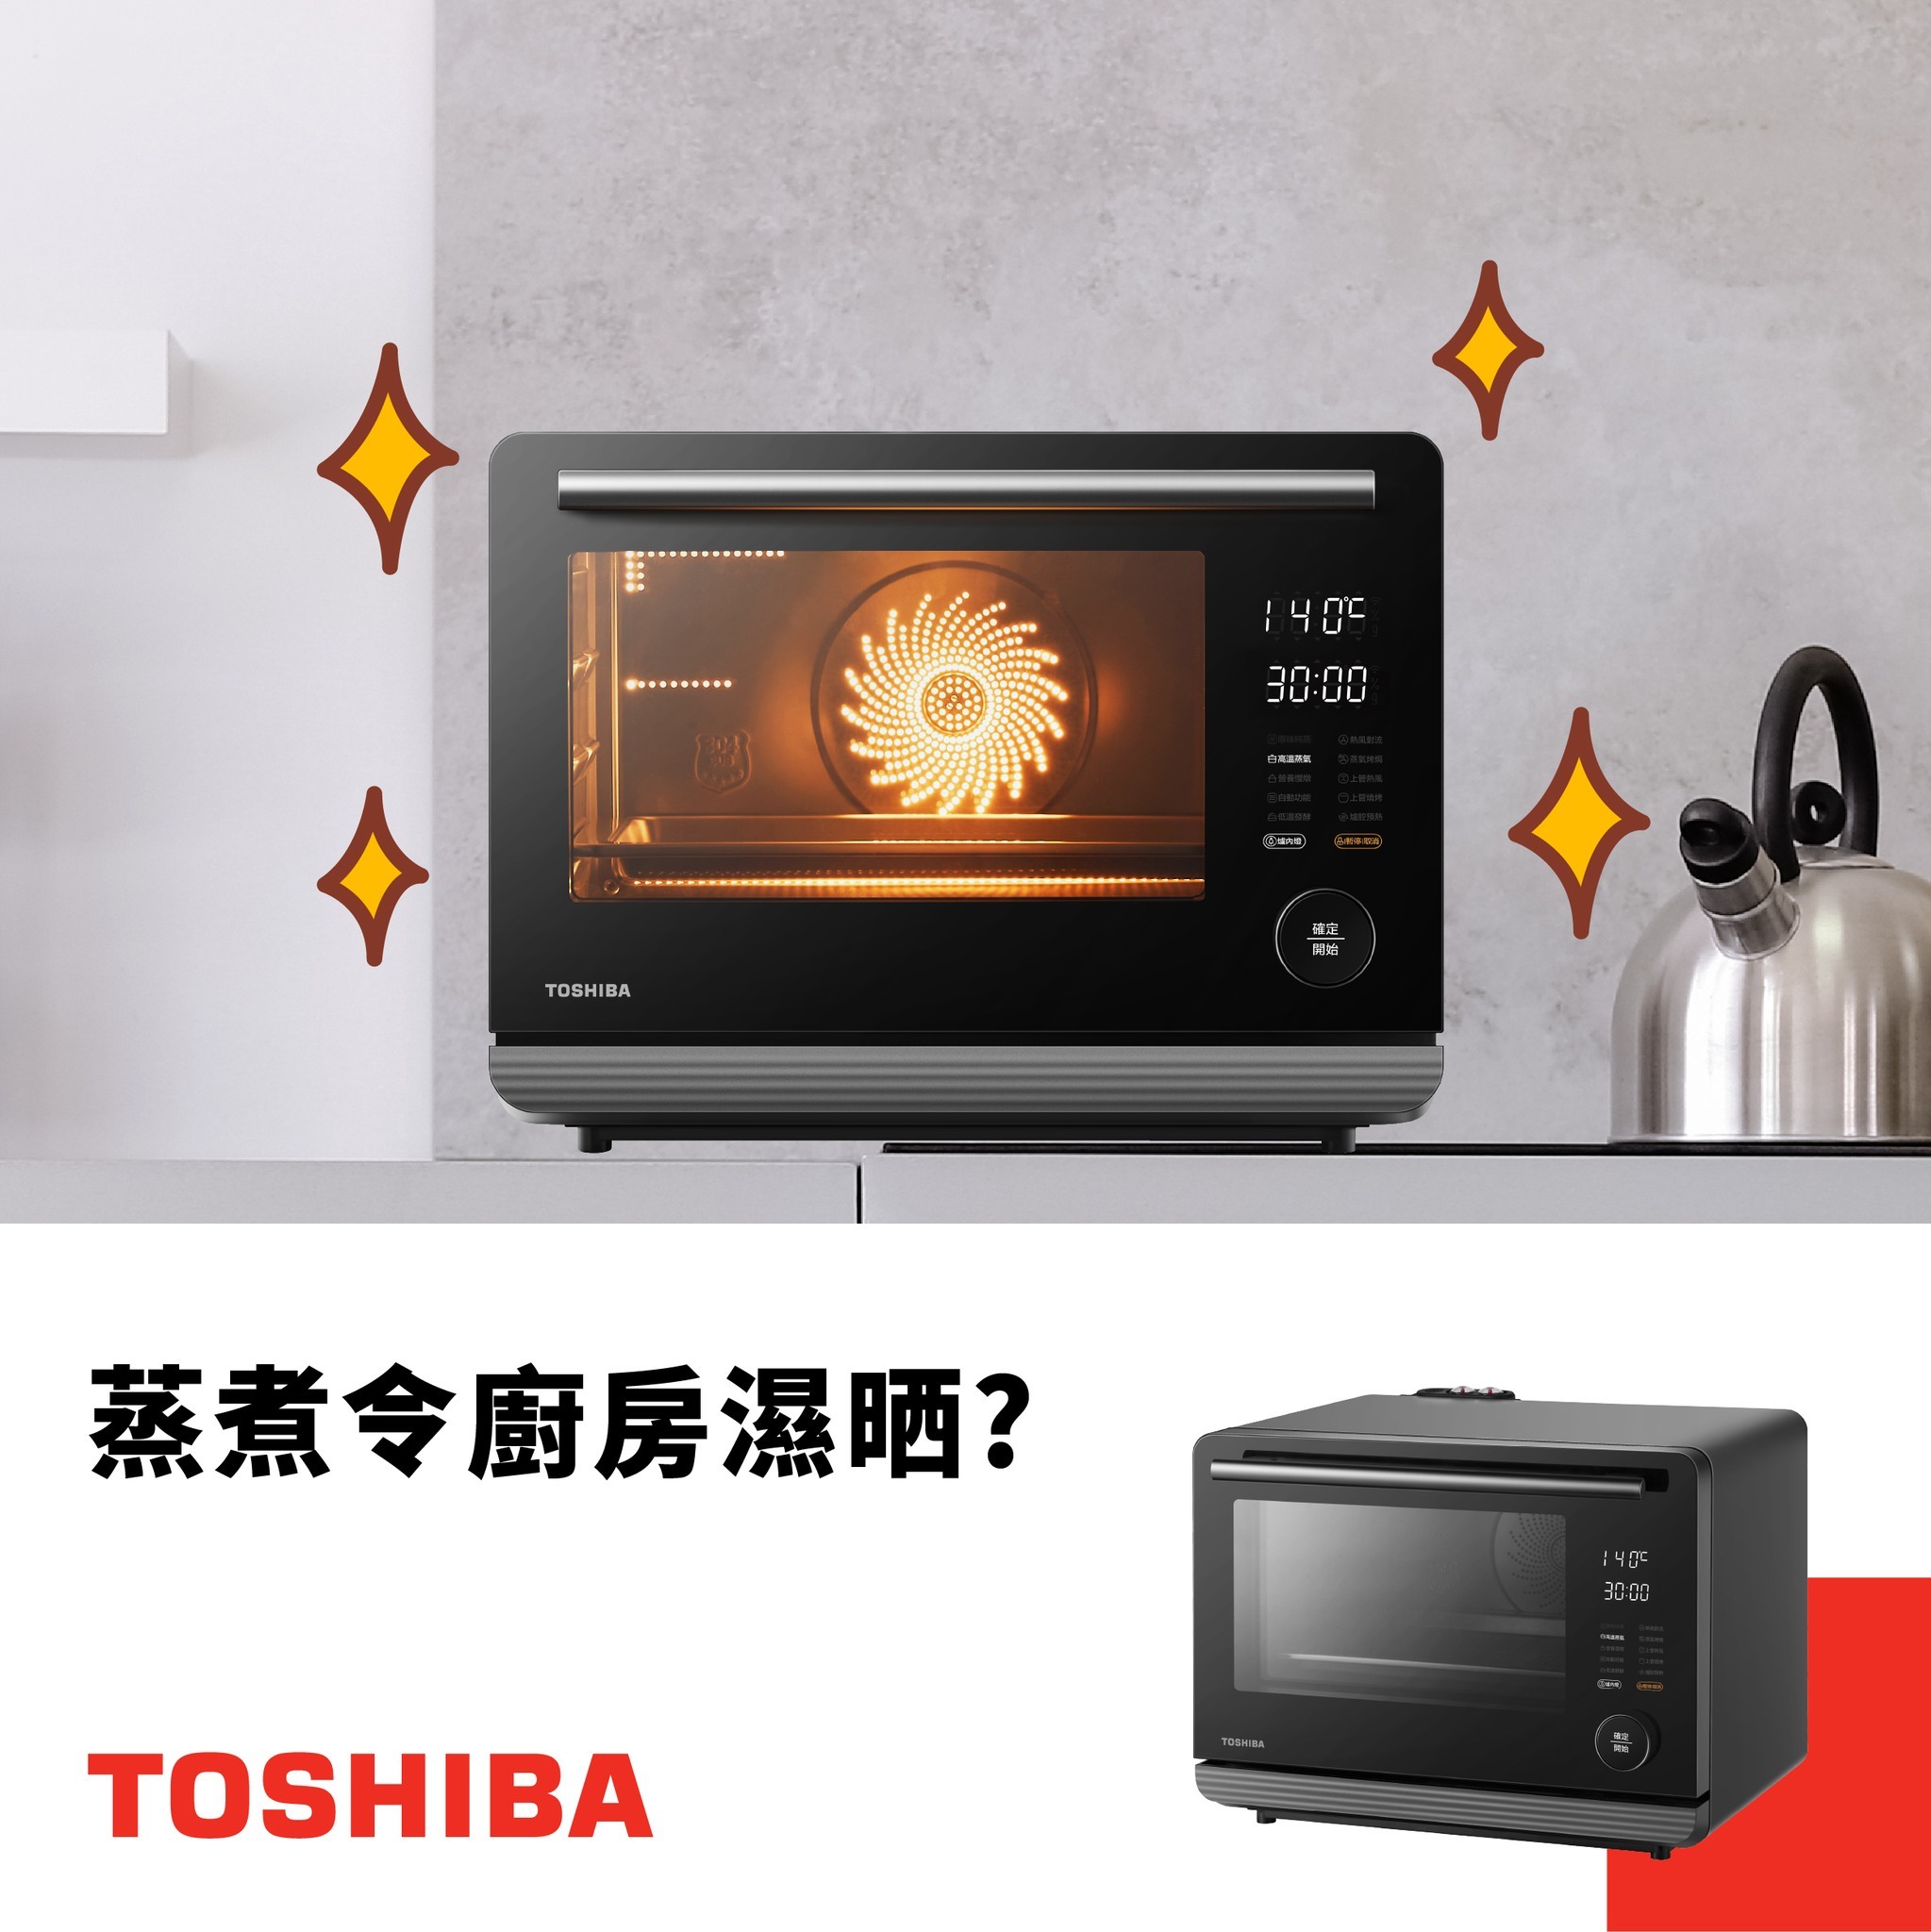 TOSHIBA 7-in-1 Countertop Microwave Oven Air Fryer Macao